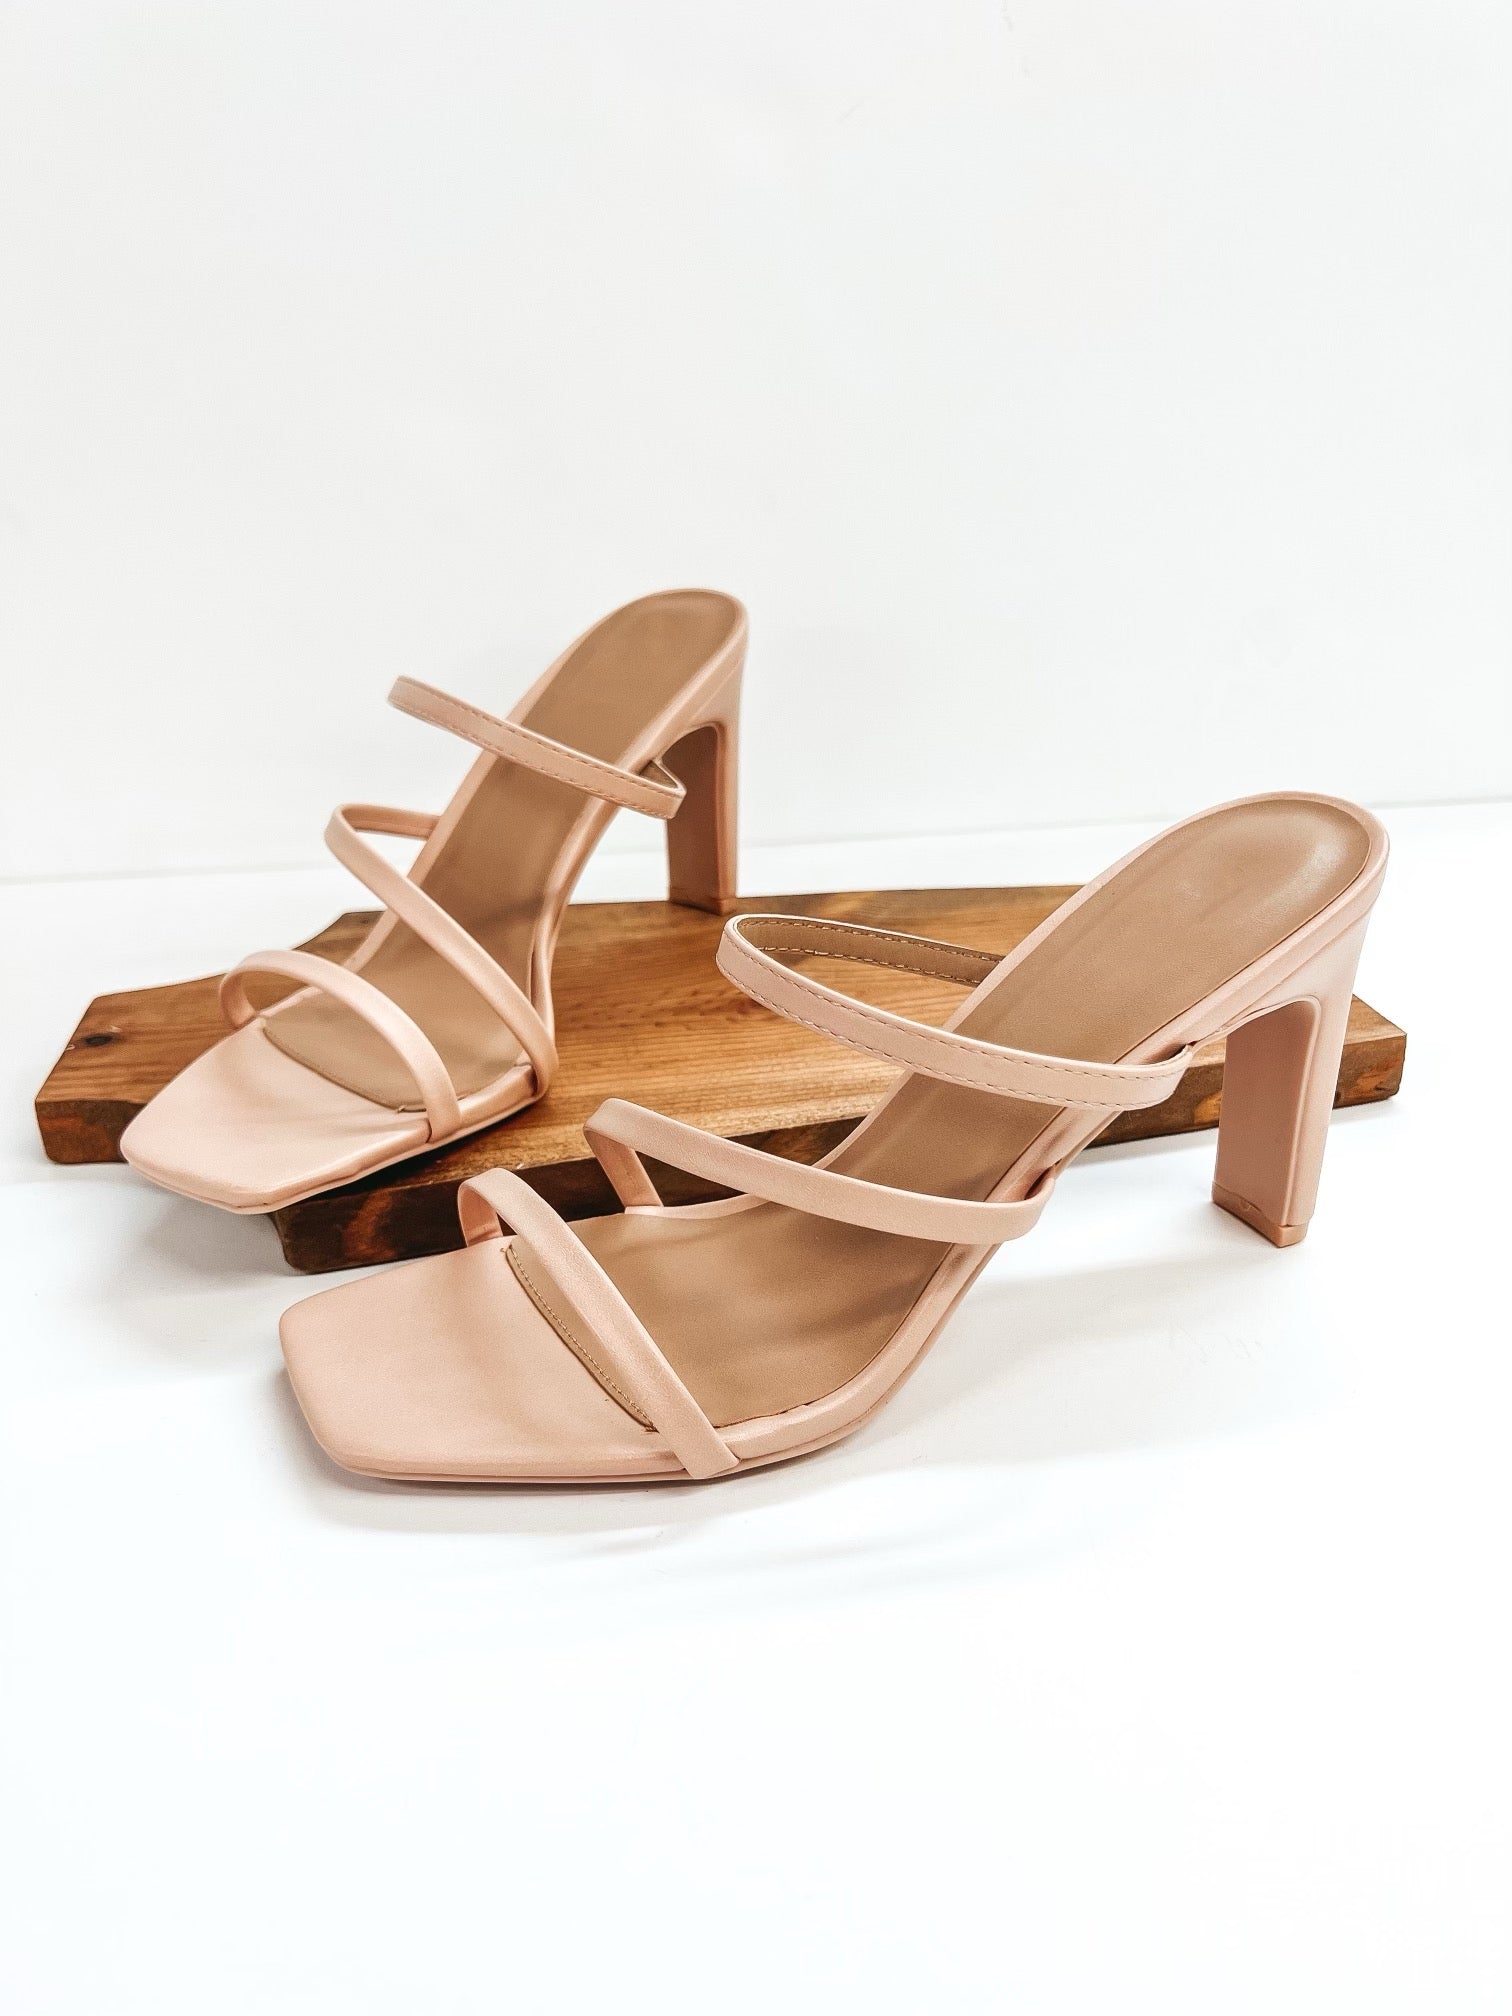 Upper West Side Strappy Heeled Sandals in Nude - Giddy Up Glamour Boutique